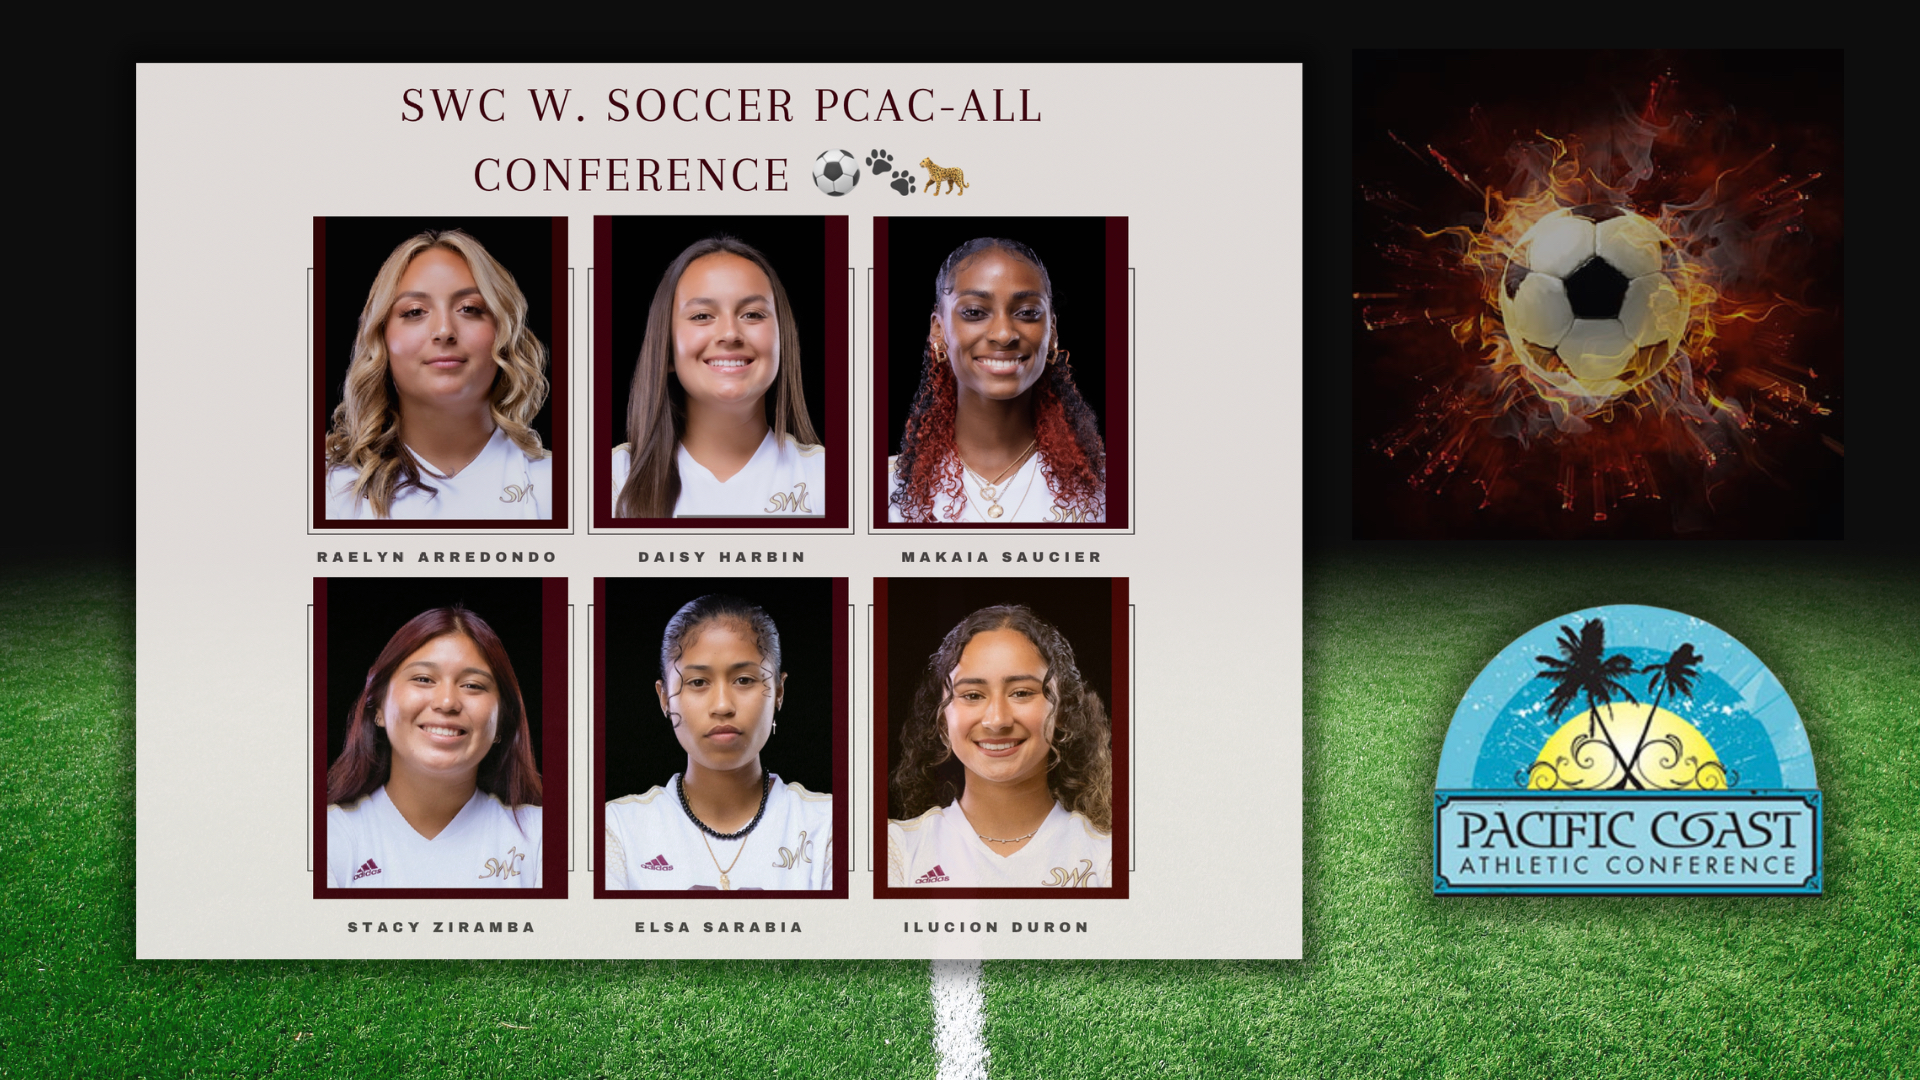 Congratulations to the following Women’s Soccer Student Athletes for being selected to the PCAC All-Conference in Jaguar athletics